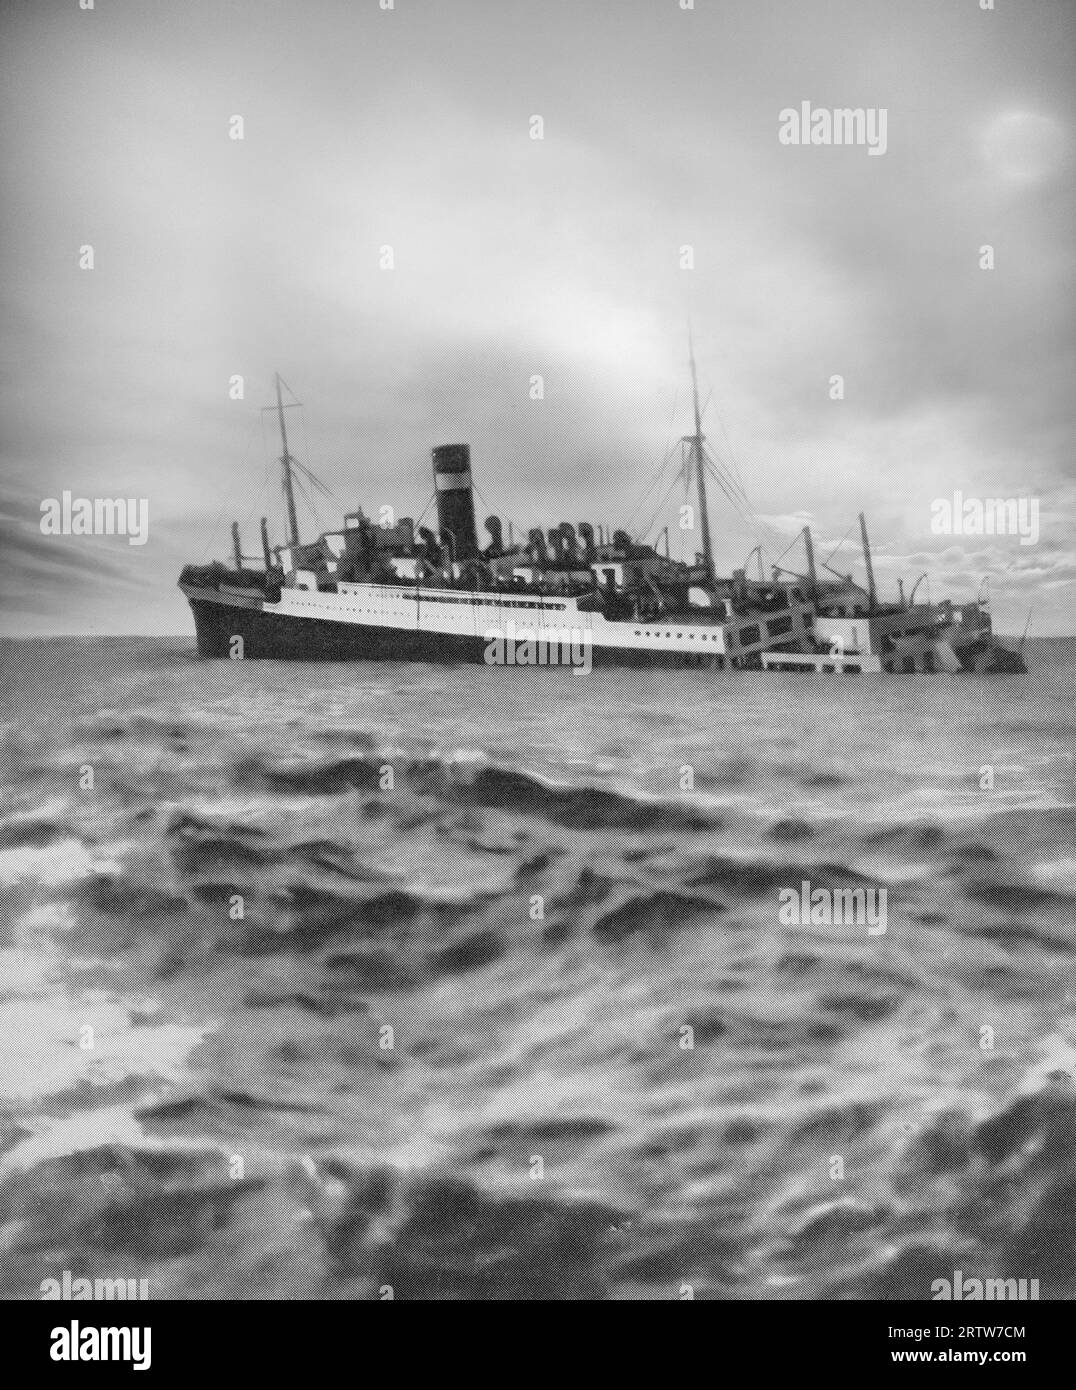 On 3rd September 1939, the day the outbreak of the Second World War on the 3rd September 1939 was declared, a German U-boat torpedoed the 'SS Athenia' in mid-Atlantic. Of the 1,000 plus passengers, including women and children, travelling from Belfast to Montreal, just 112 were rescued. Stock Photo